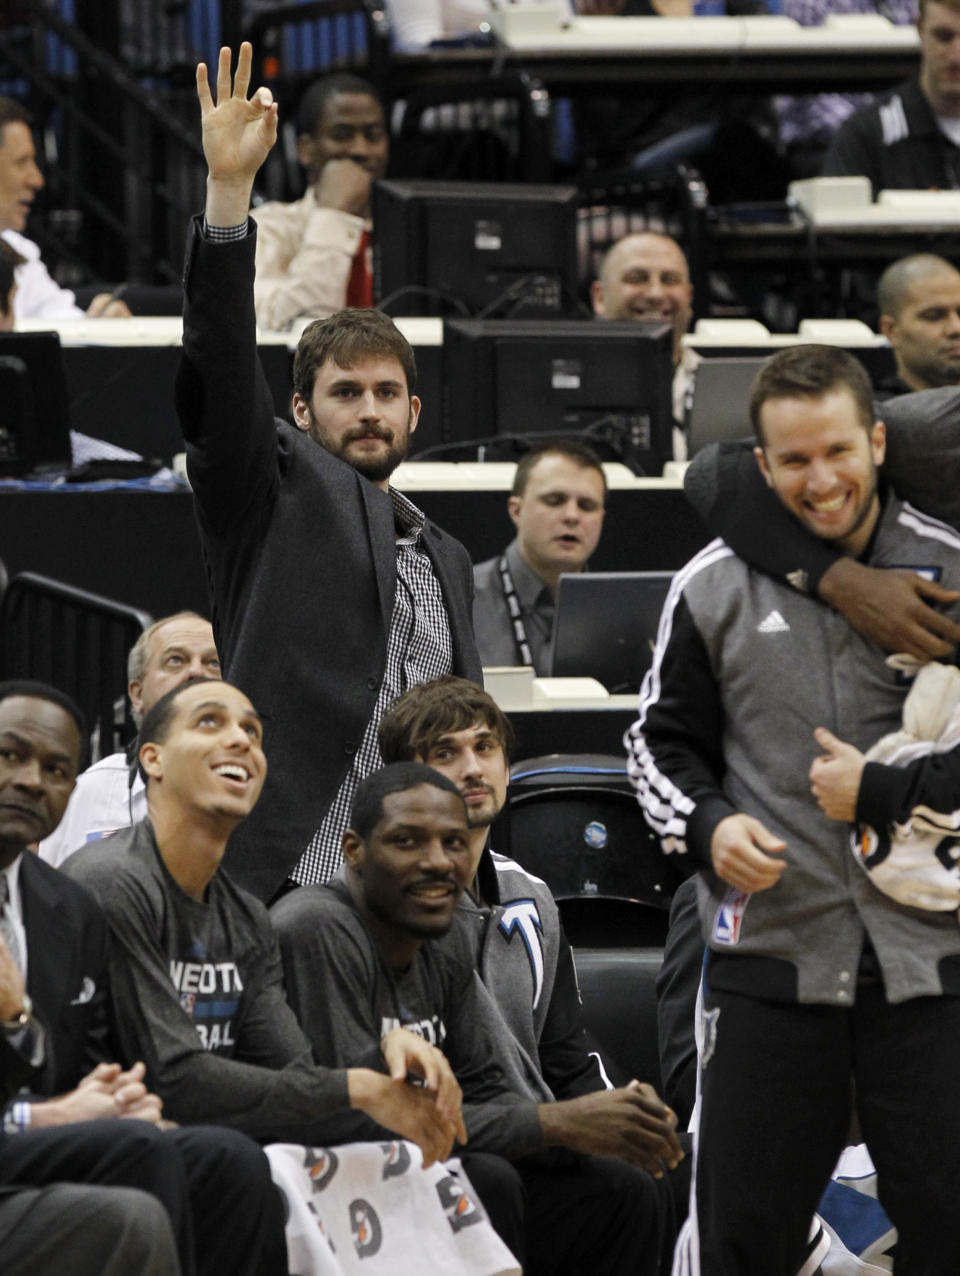 Minnesota Timberwolves forward Kevin Love cheers on his teammates from the bench during the first quarter of an NBA basketball game against the Houston Rockets in Minneapolis, Friday, April 11, 2014. Love was out with a hyper-extended right elbow. (AP Photo/Ann Heisenfelt)